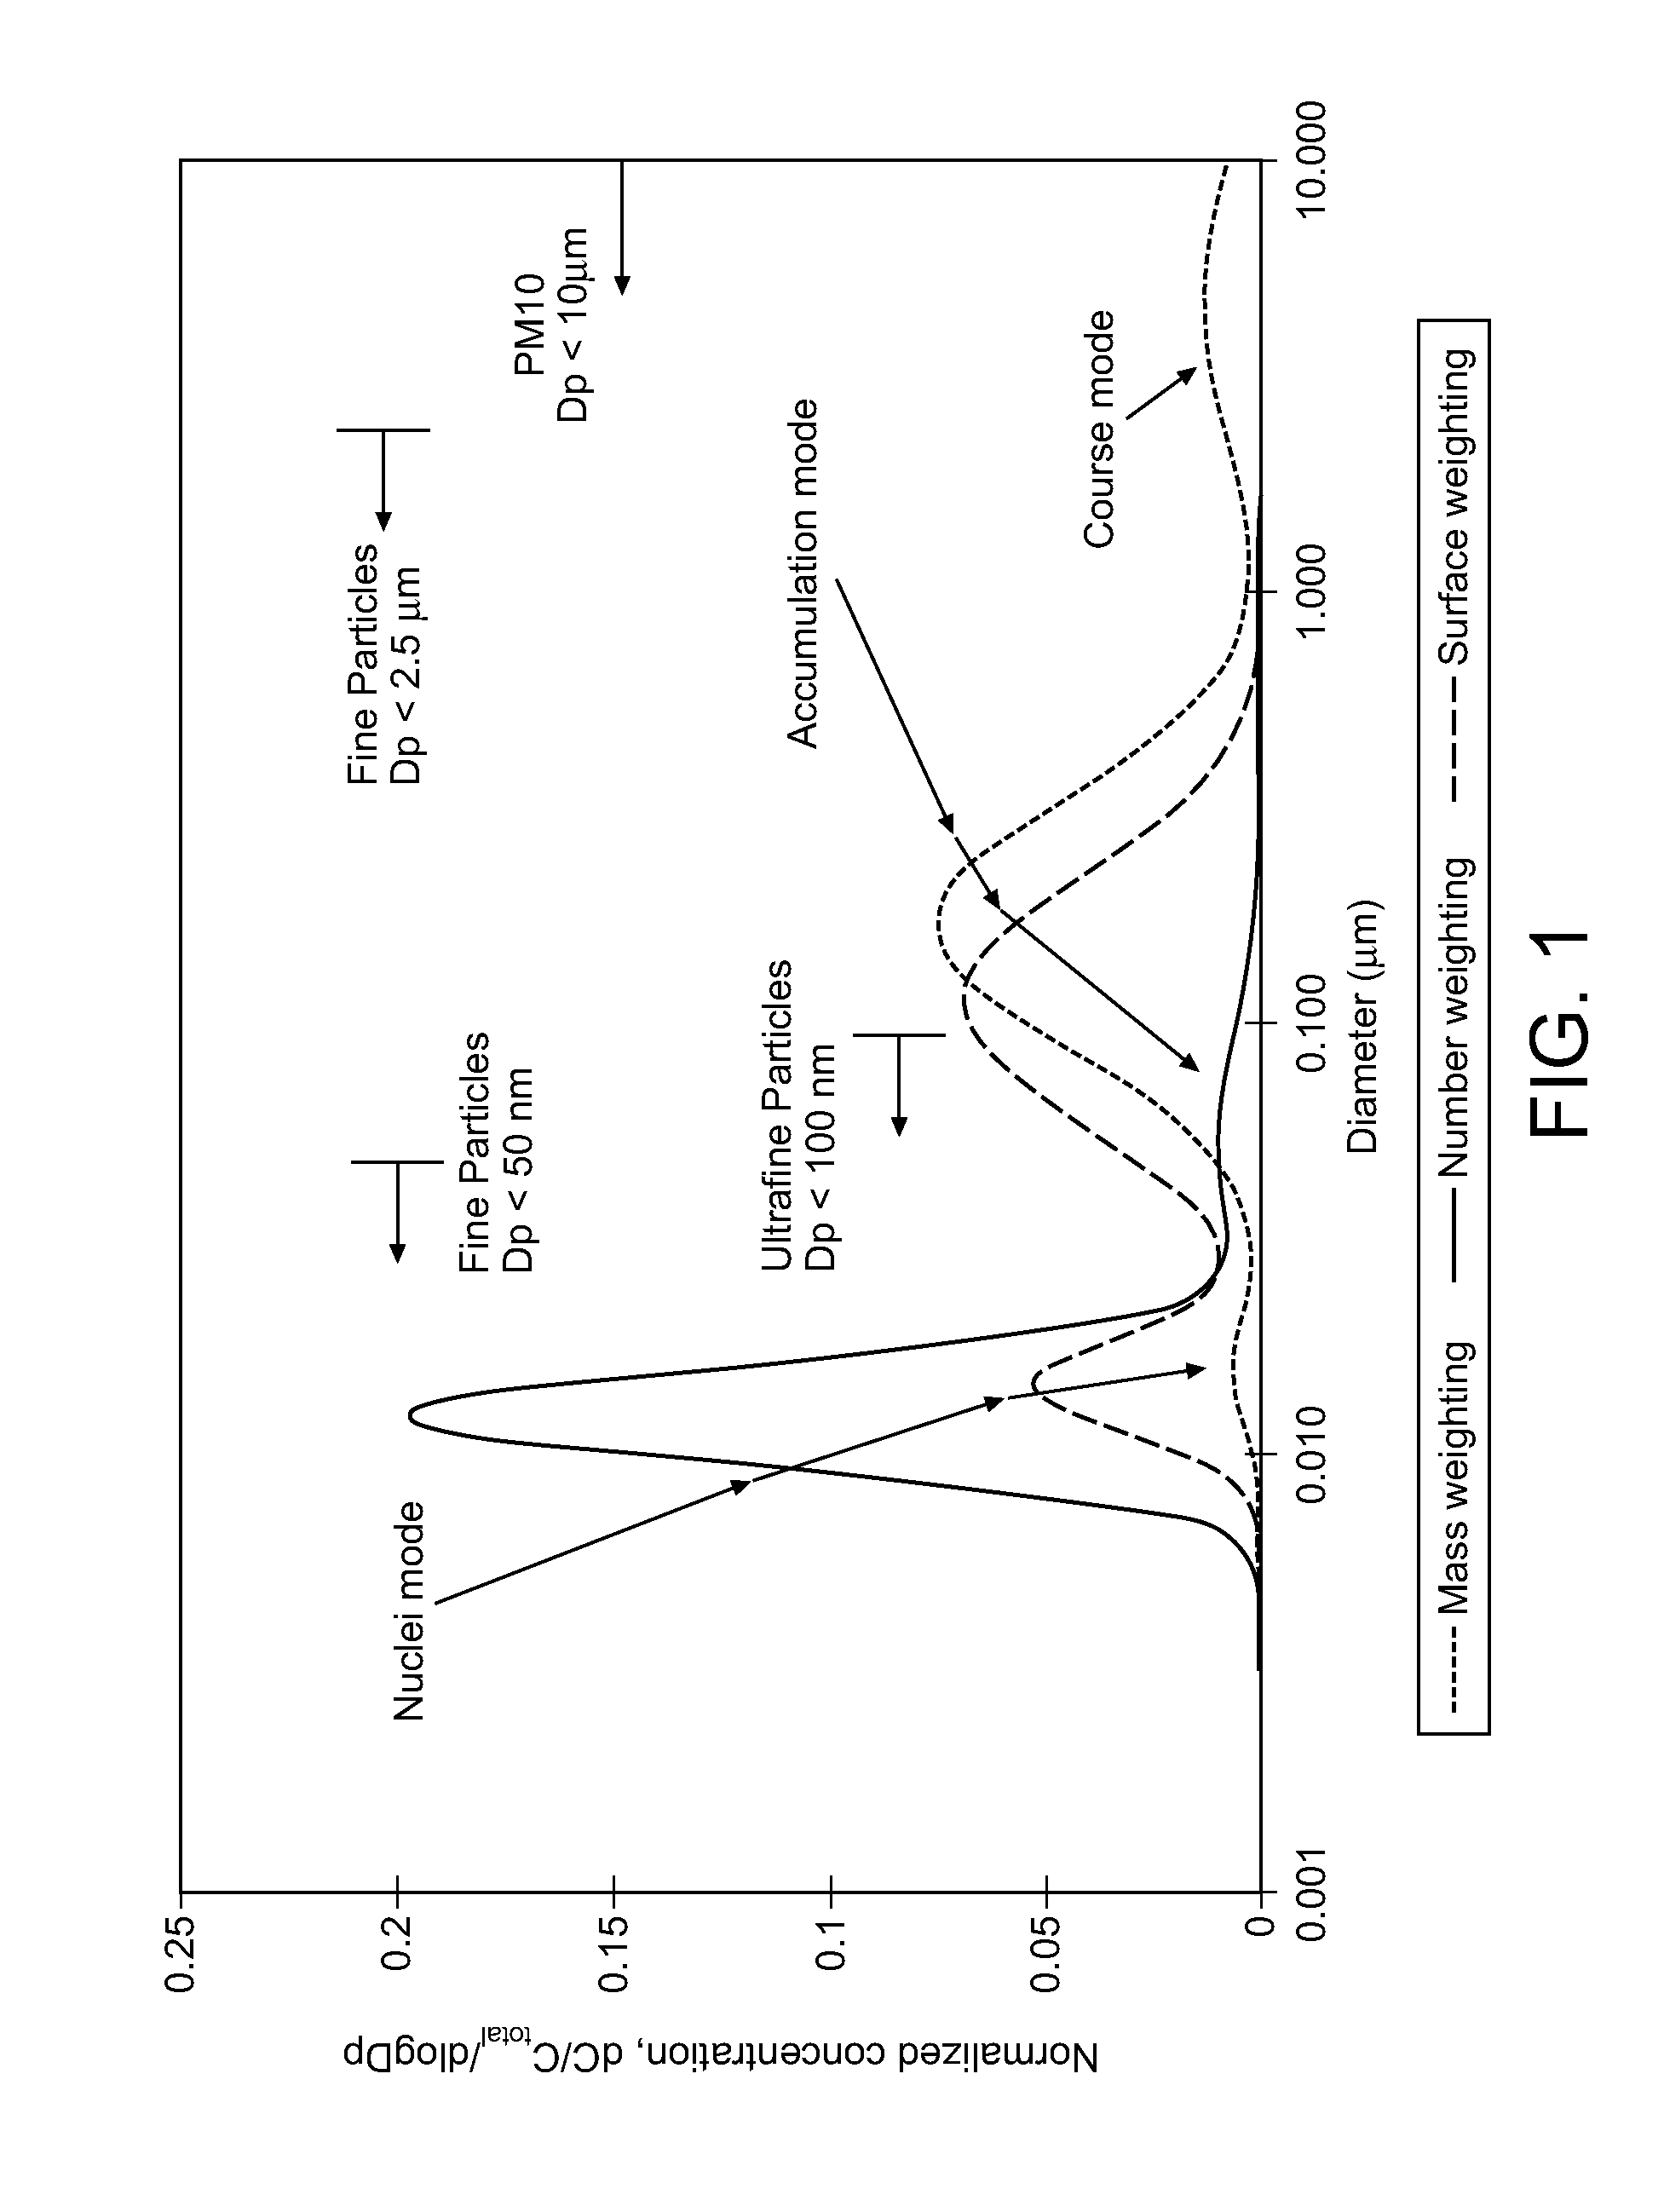 Method and system using a filter for treating exhaust gas having particulate matter